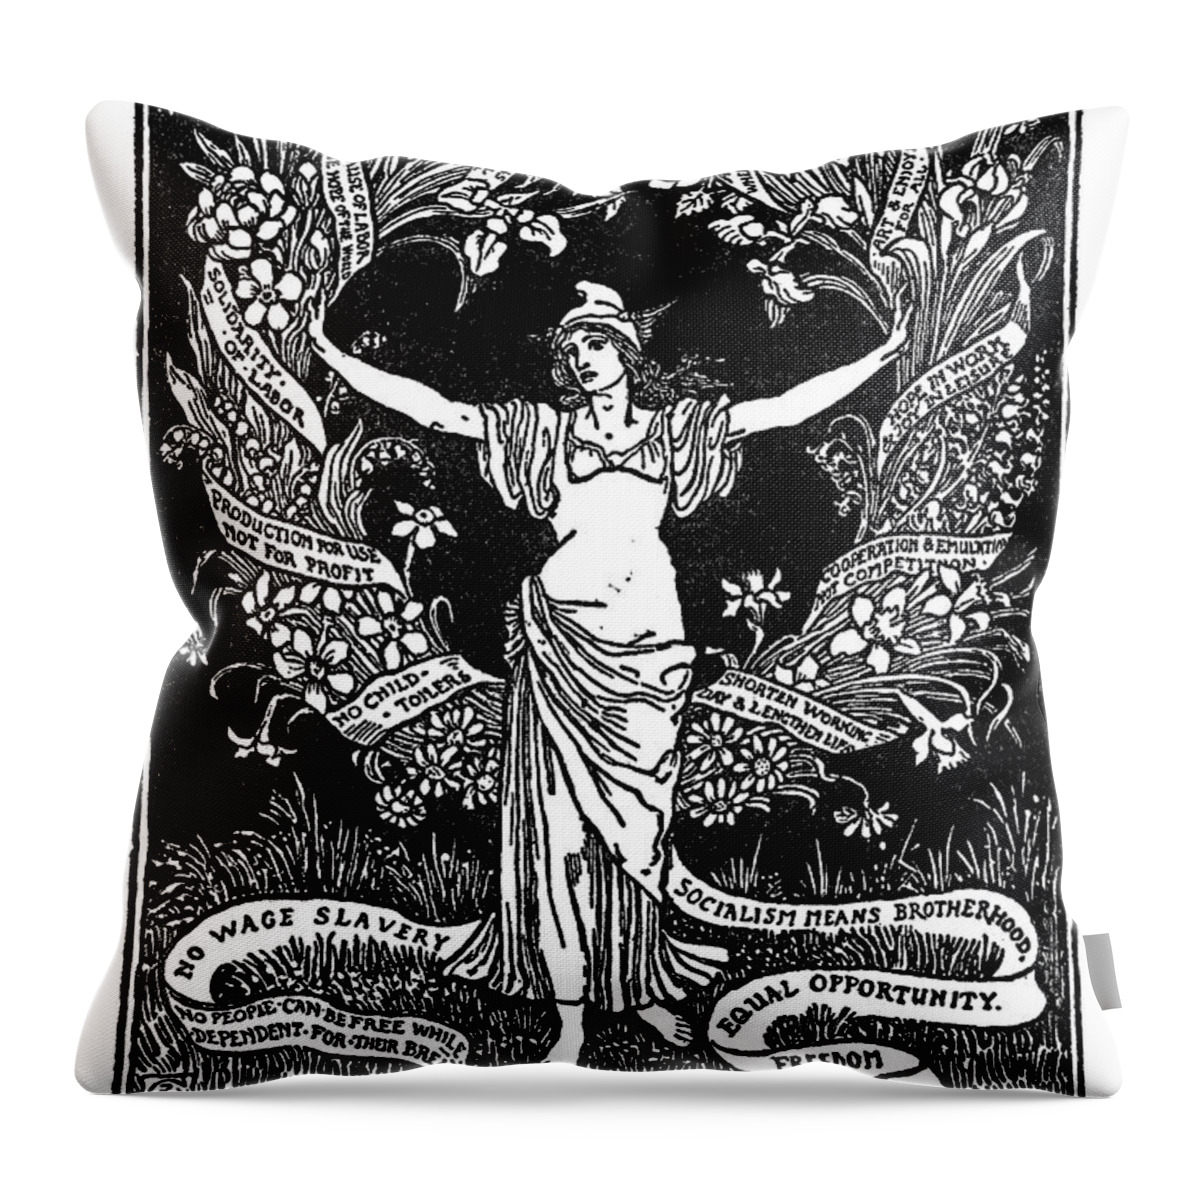 1913 Throw Pillow featuring the drawing A Garland For May Day, 1913 by Walter Crane